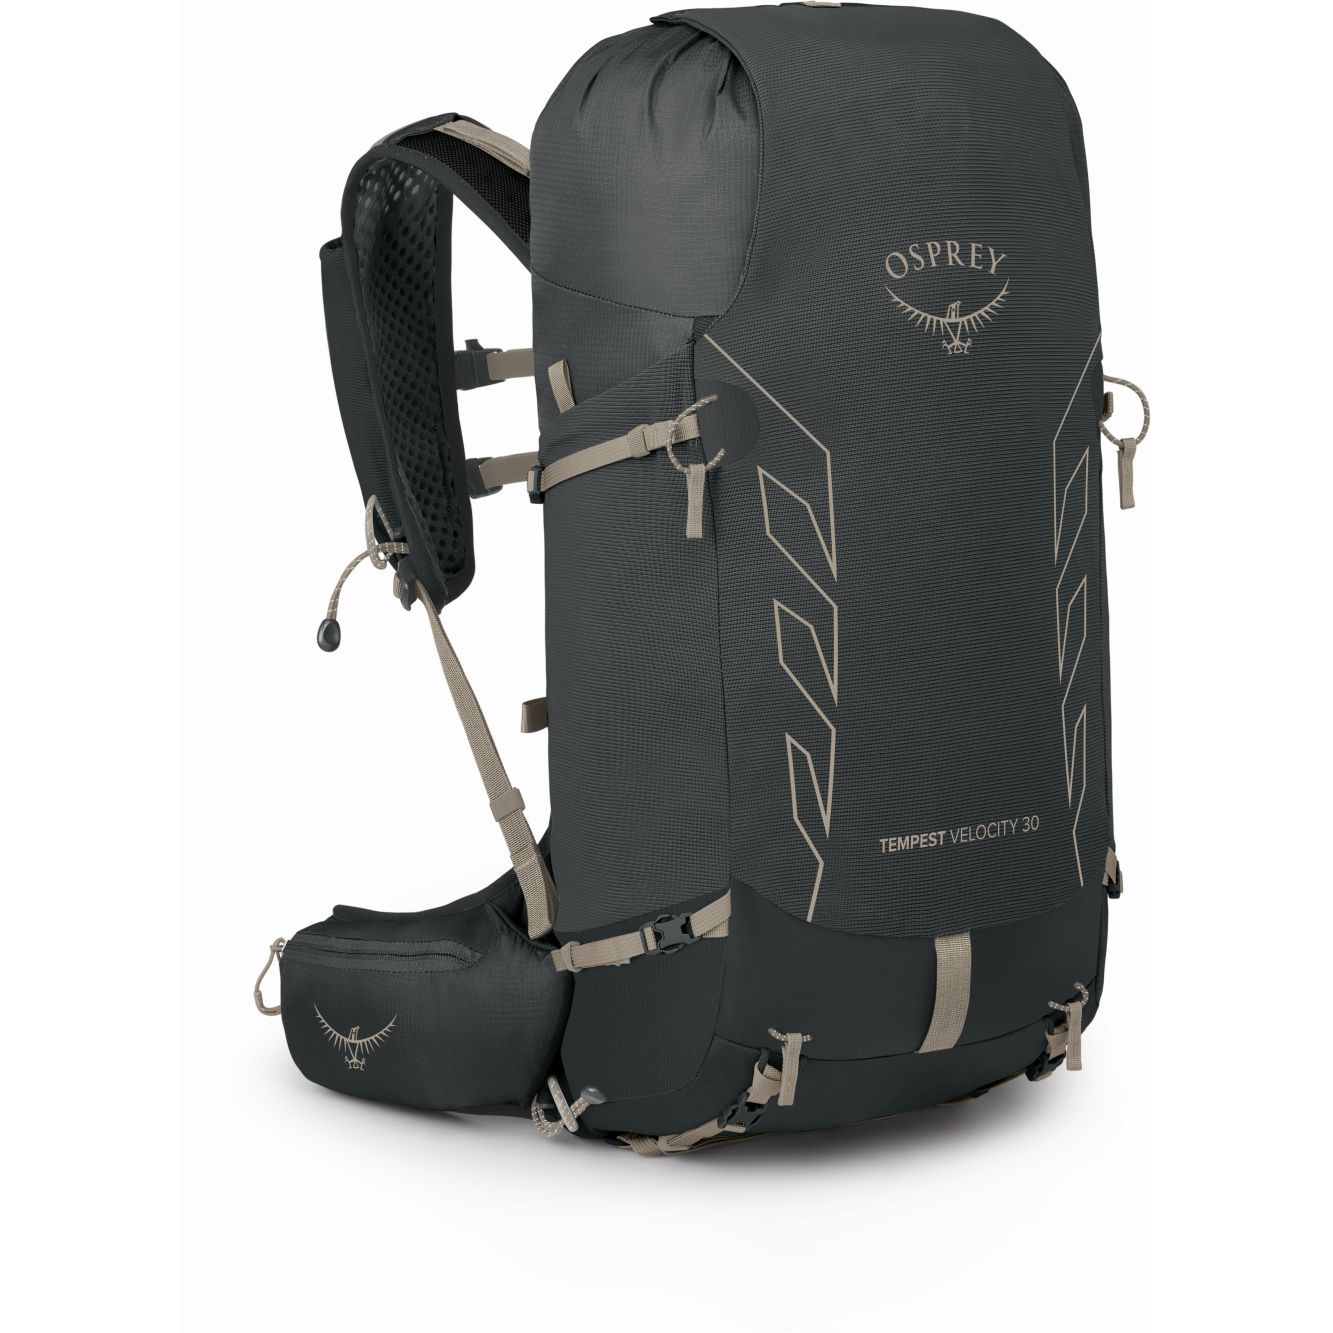 Picture of Osprey Tempest Velocity 30 Women&#039;s Backpack - Dark Charcoal/Chiru Tan - XS/S